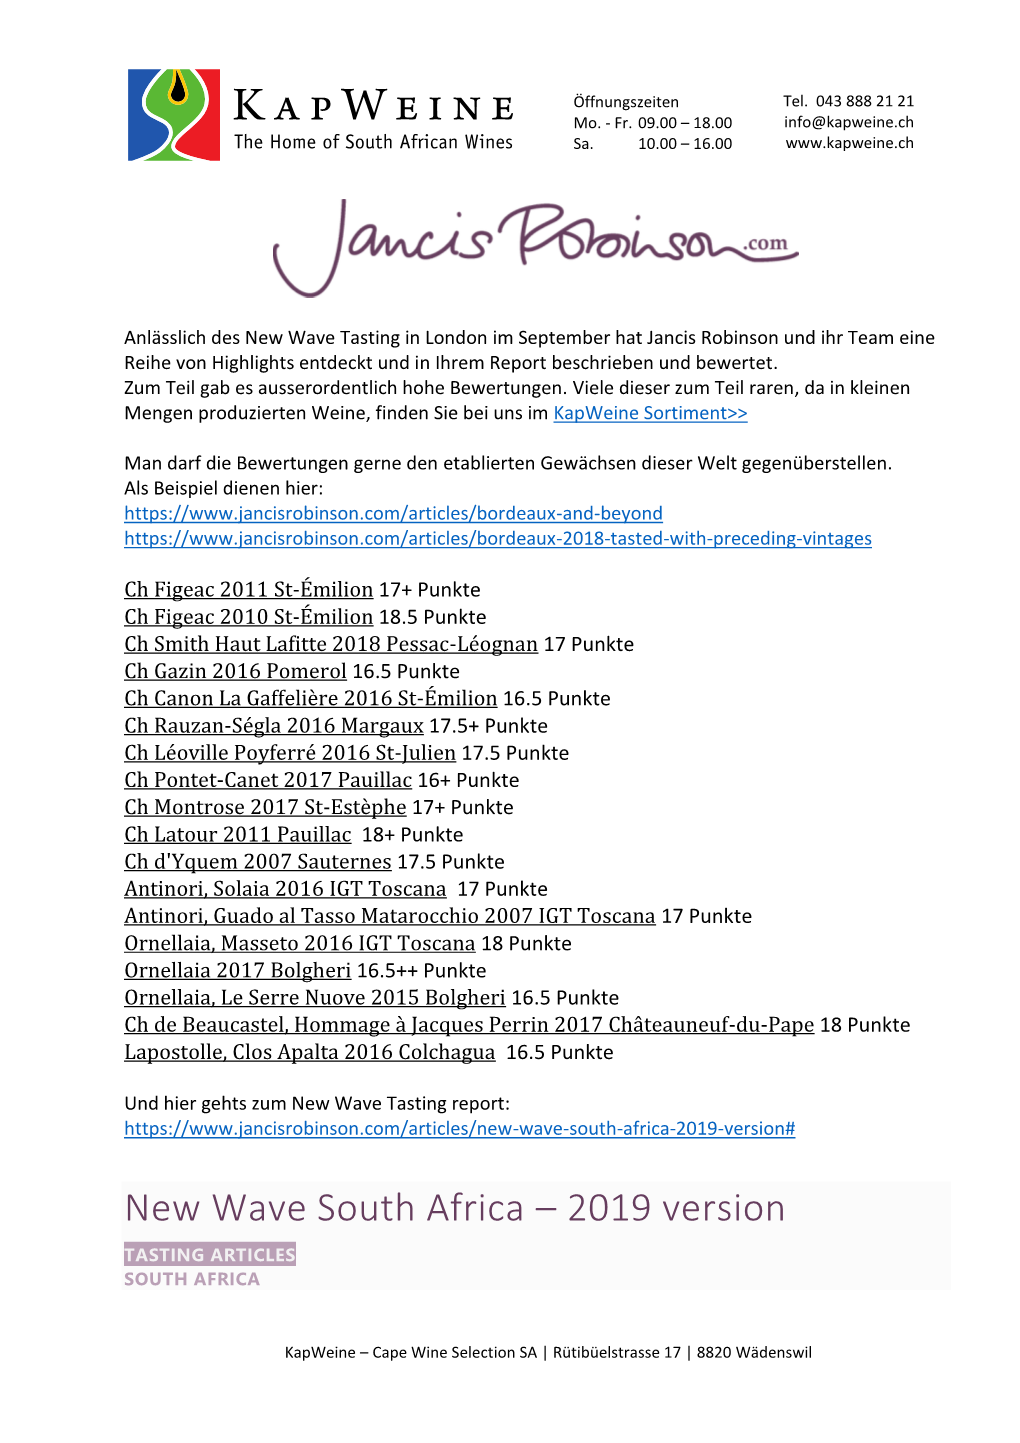 New Wave South Africa – 2019 Version TASTING ARTICLES SOUTH AFRICA